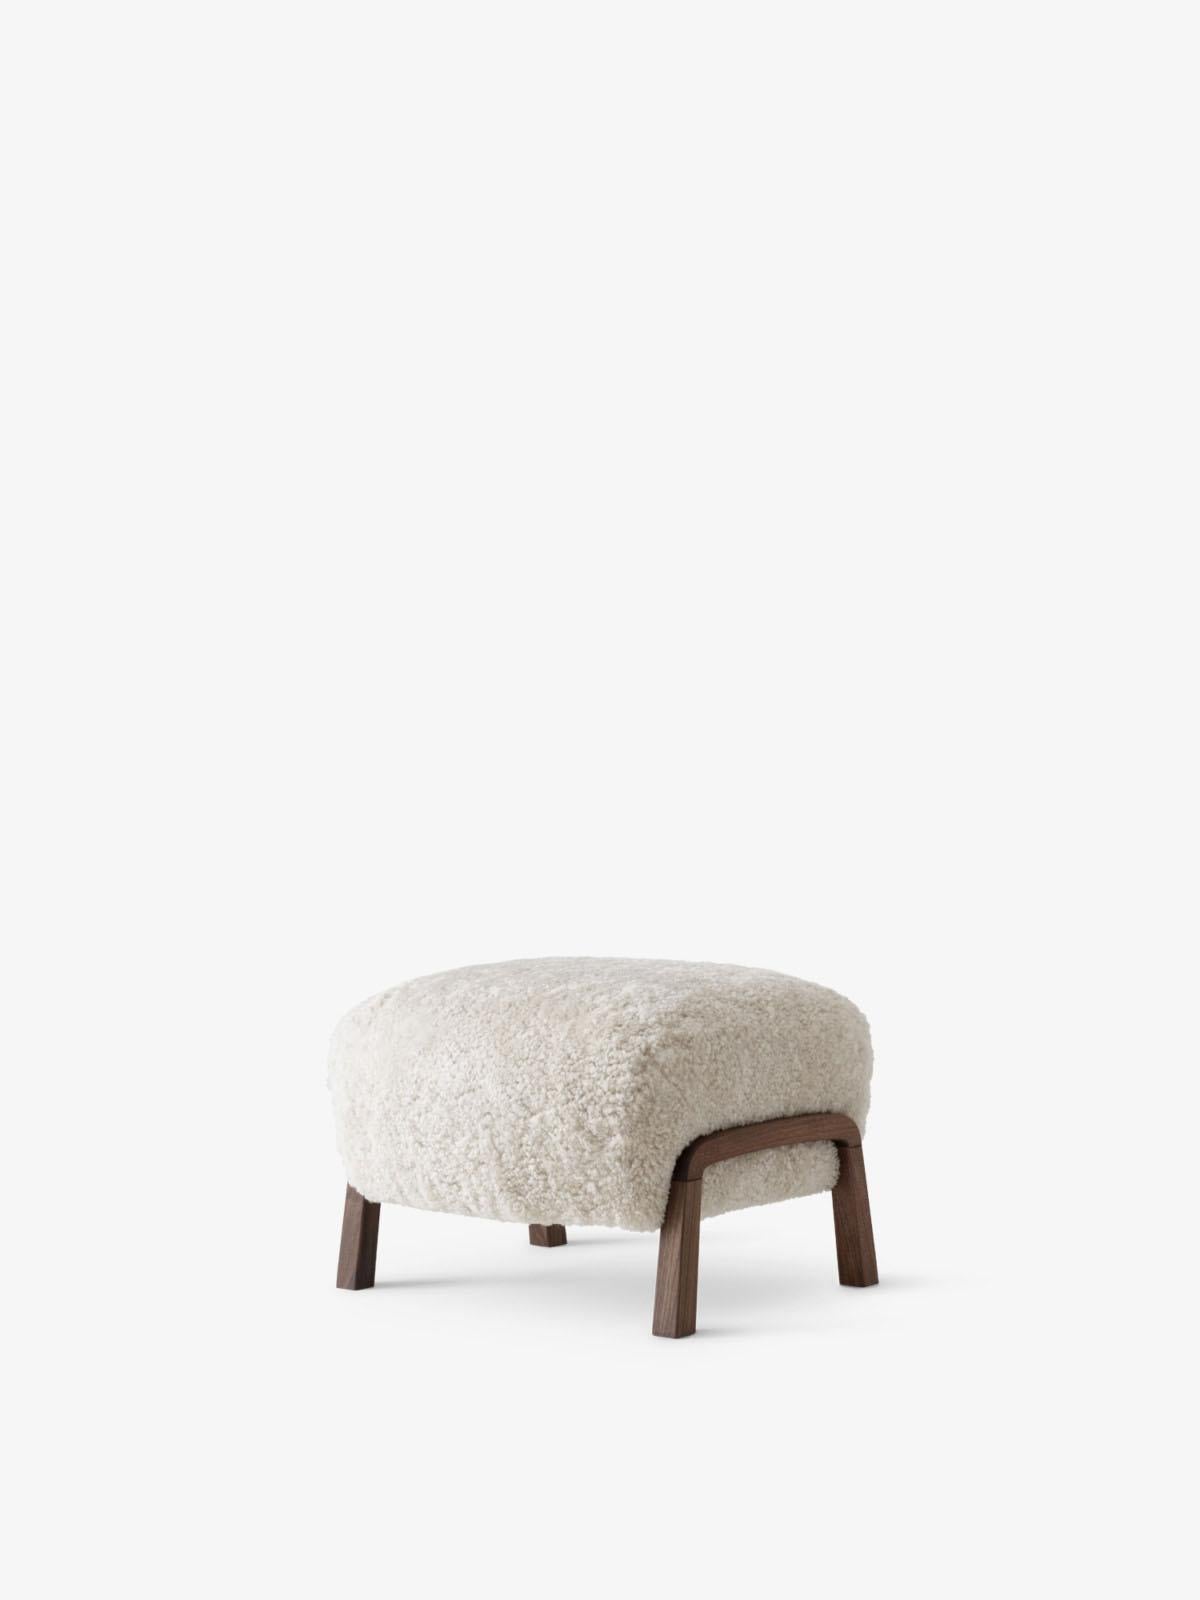 Set of 2 Wulff Atd2 & Pouf Atd3 in Sheepskin Moonlight/Walnut for & Tradition For Sale 2